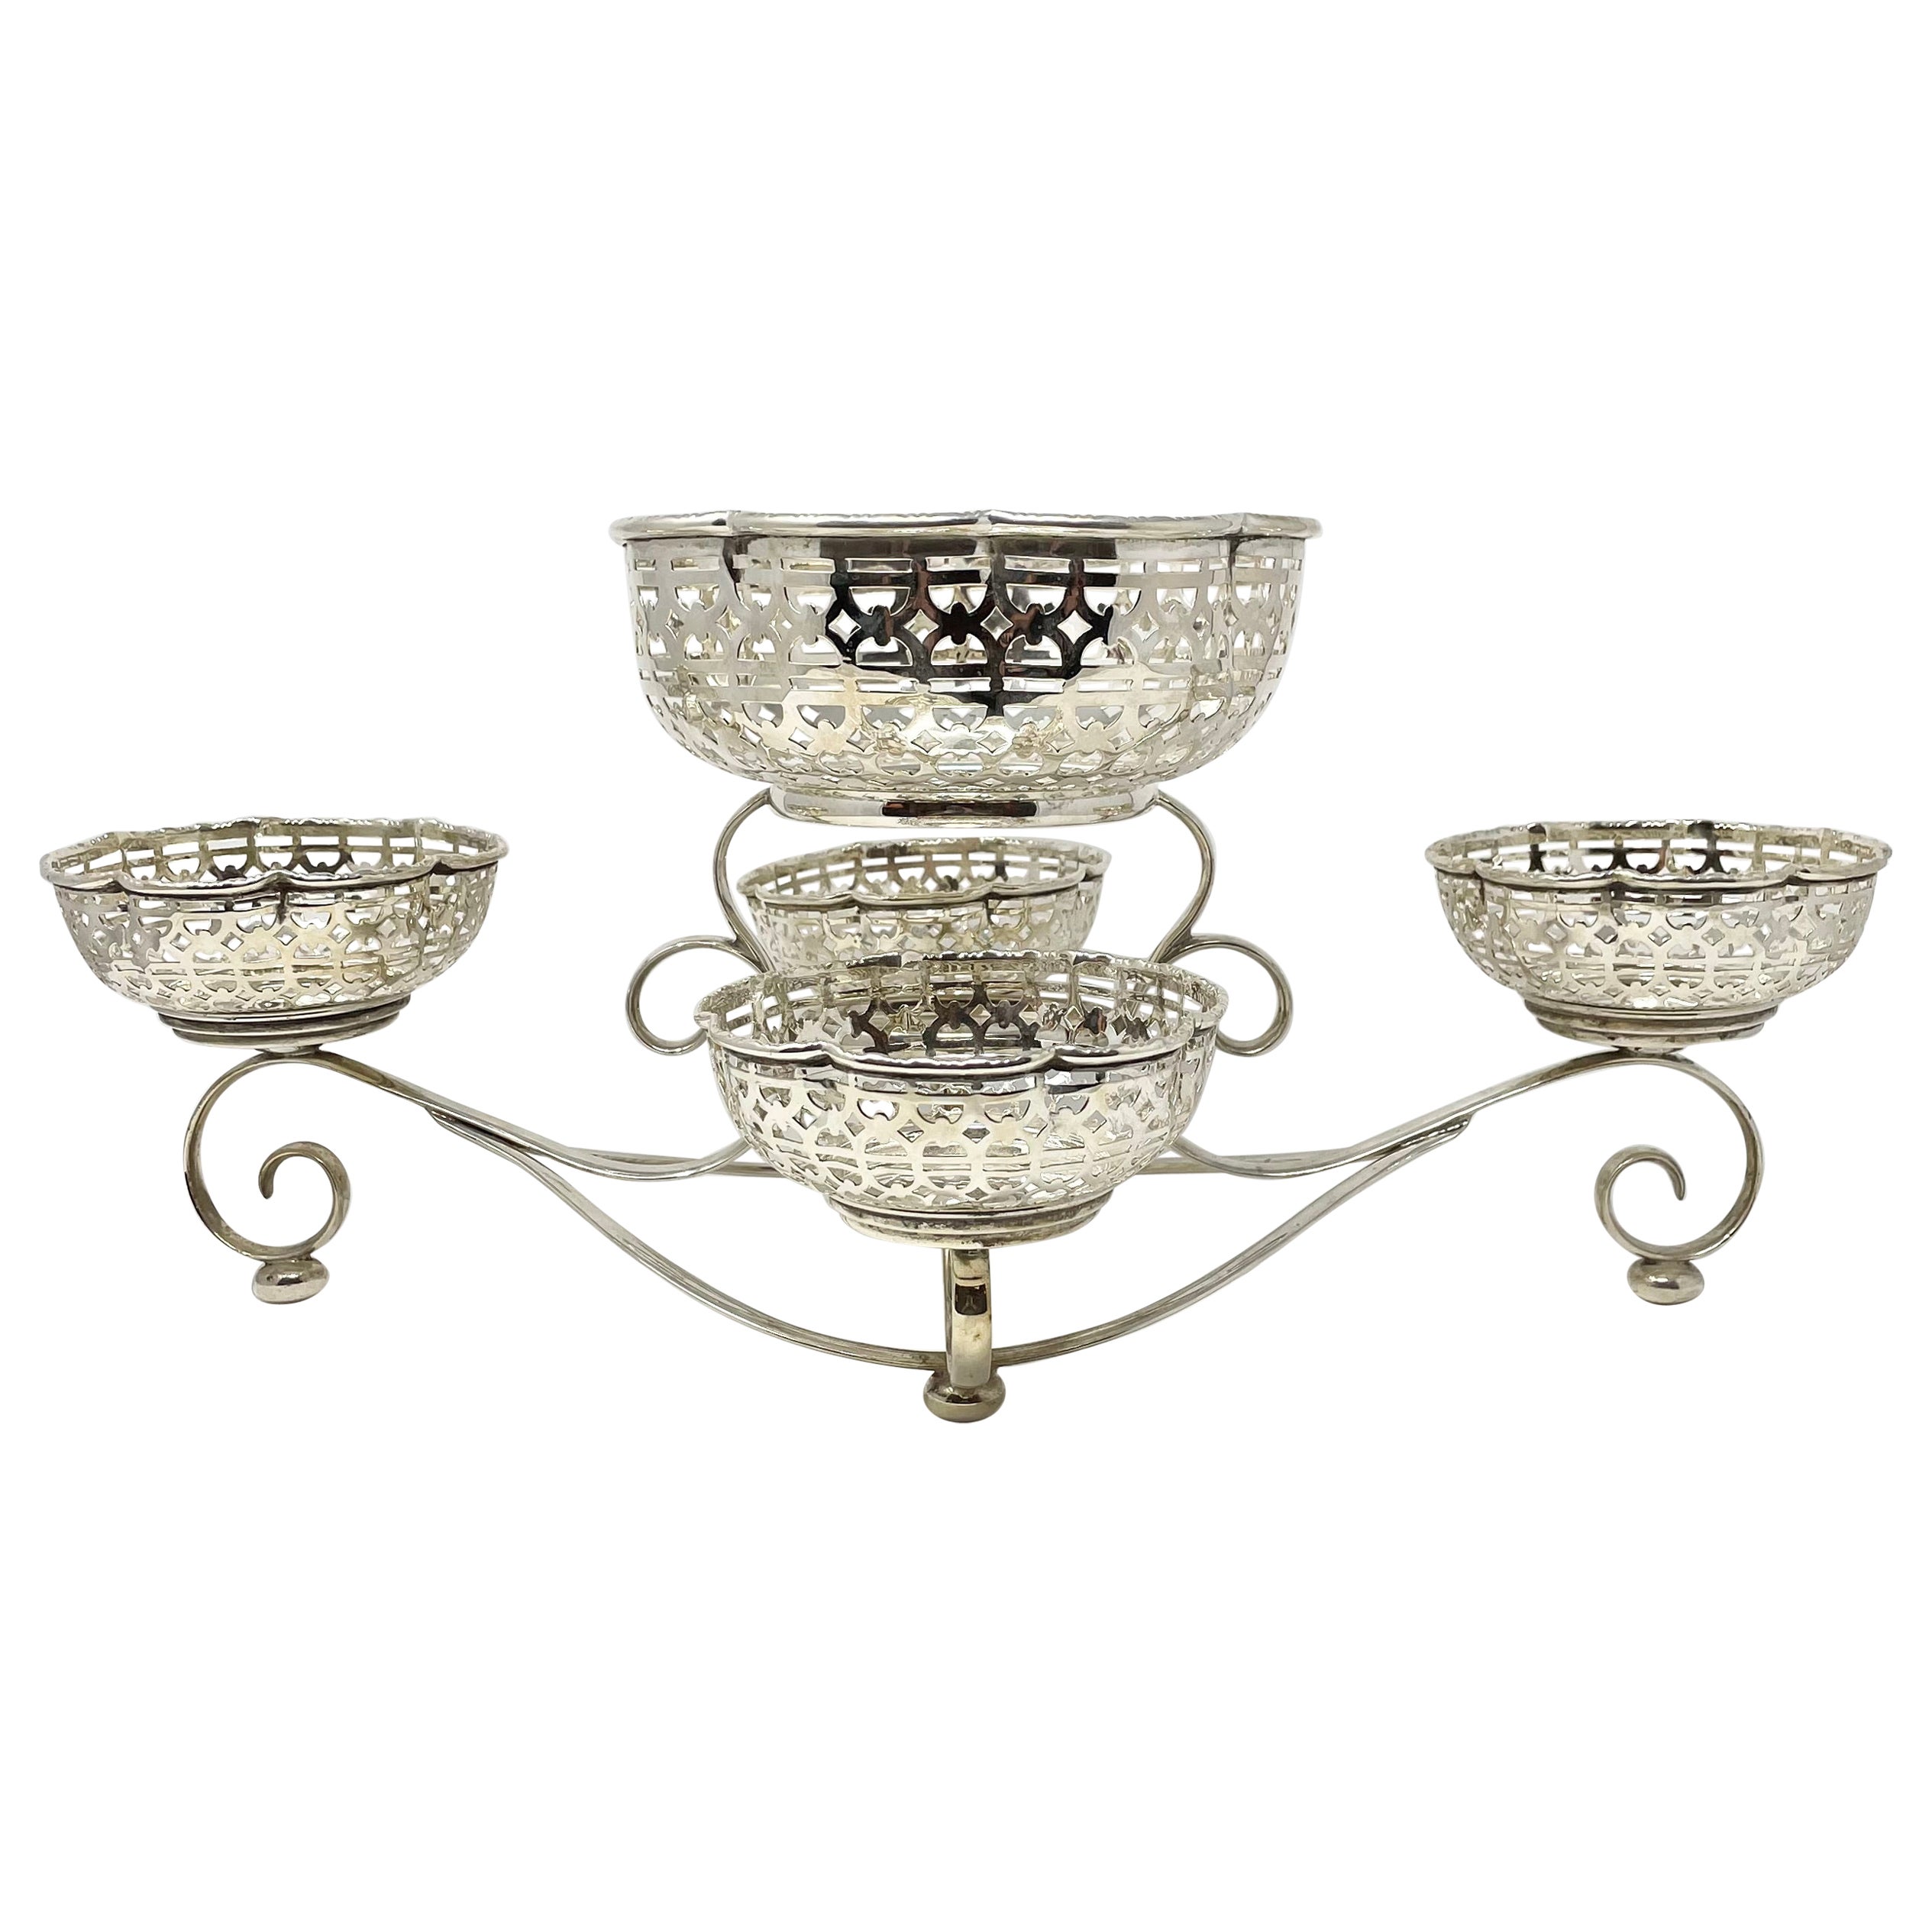 Antique English Silver-Plated 5 Piece Floral Epergne with Piercework, Circa 1900 For Sale